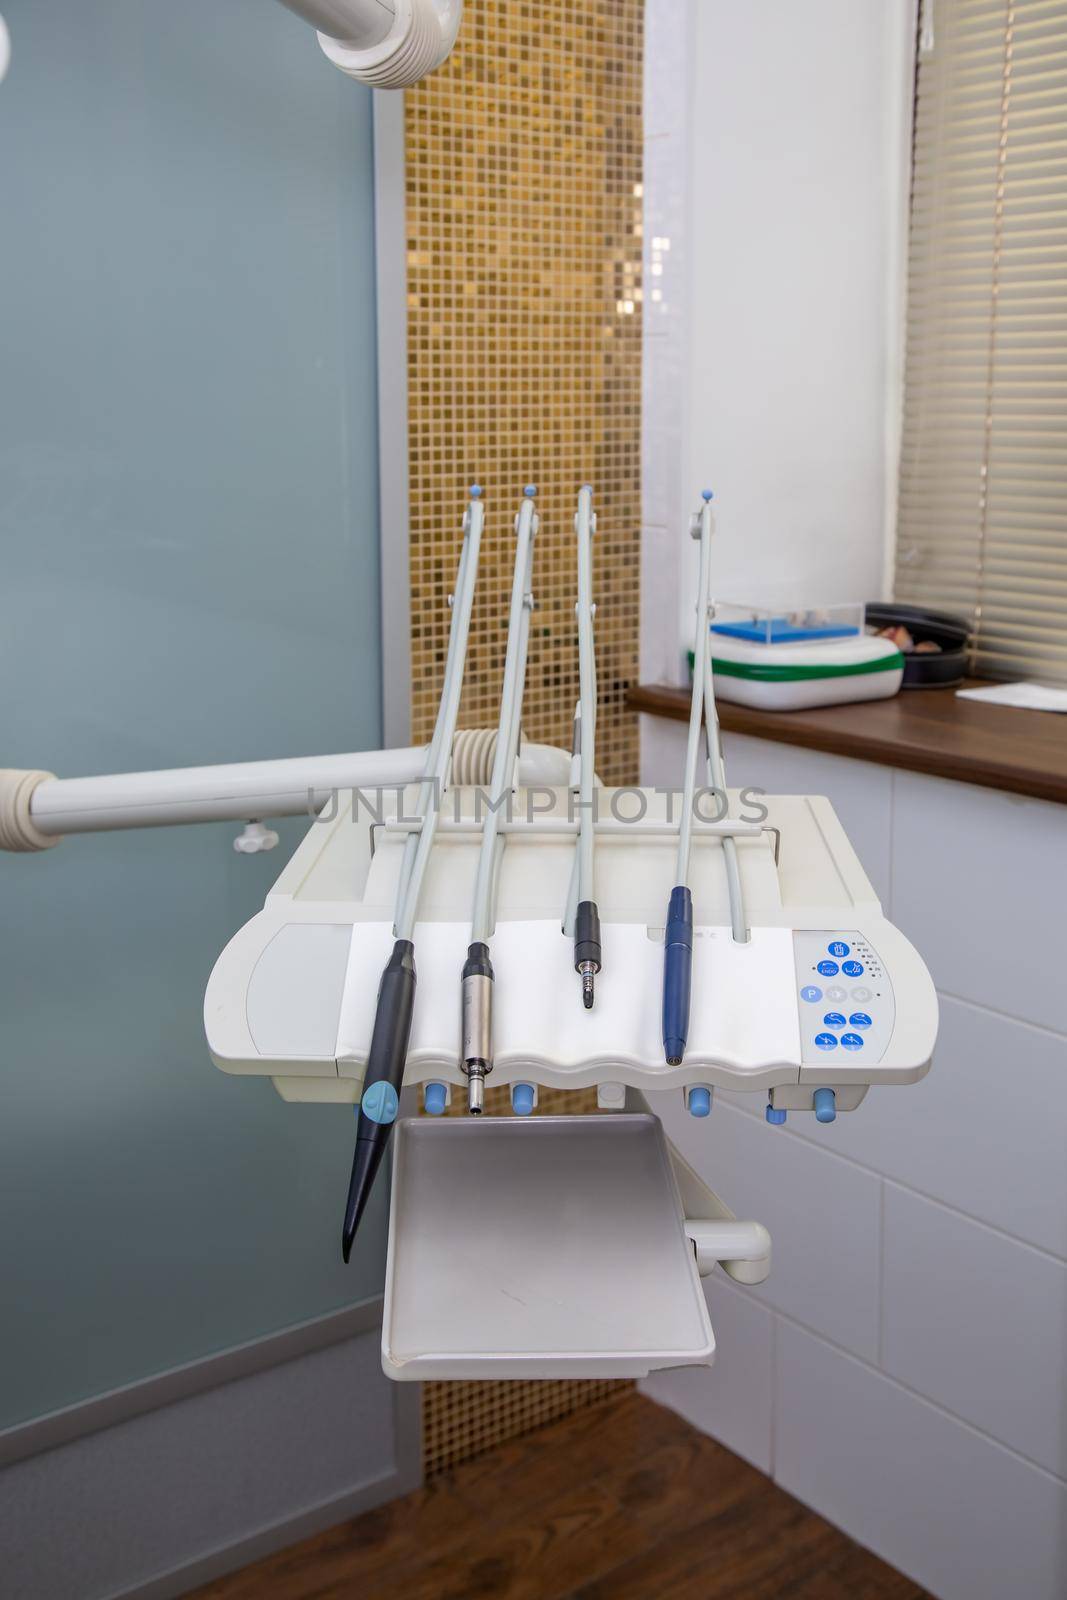 White dental equipment tools for the treatment and filling of teeth in the doctor's office.